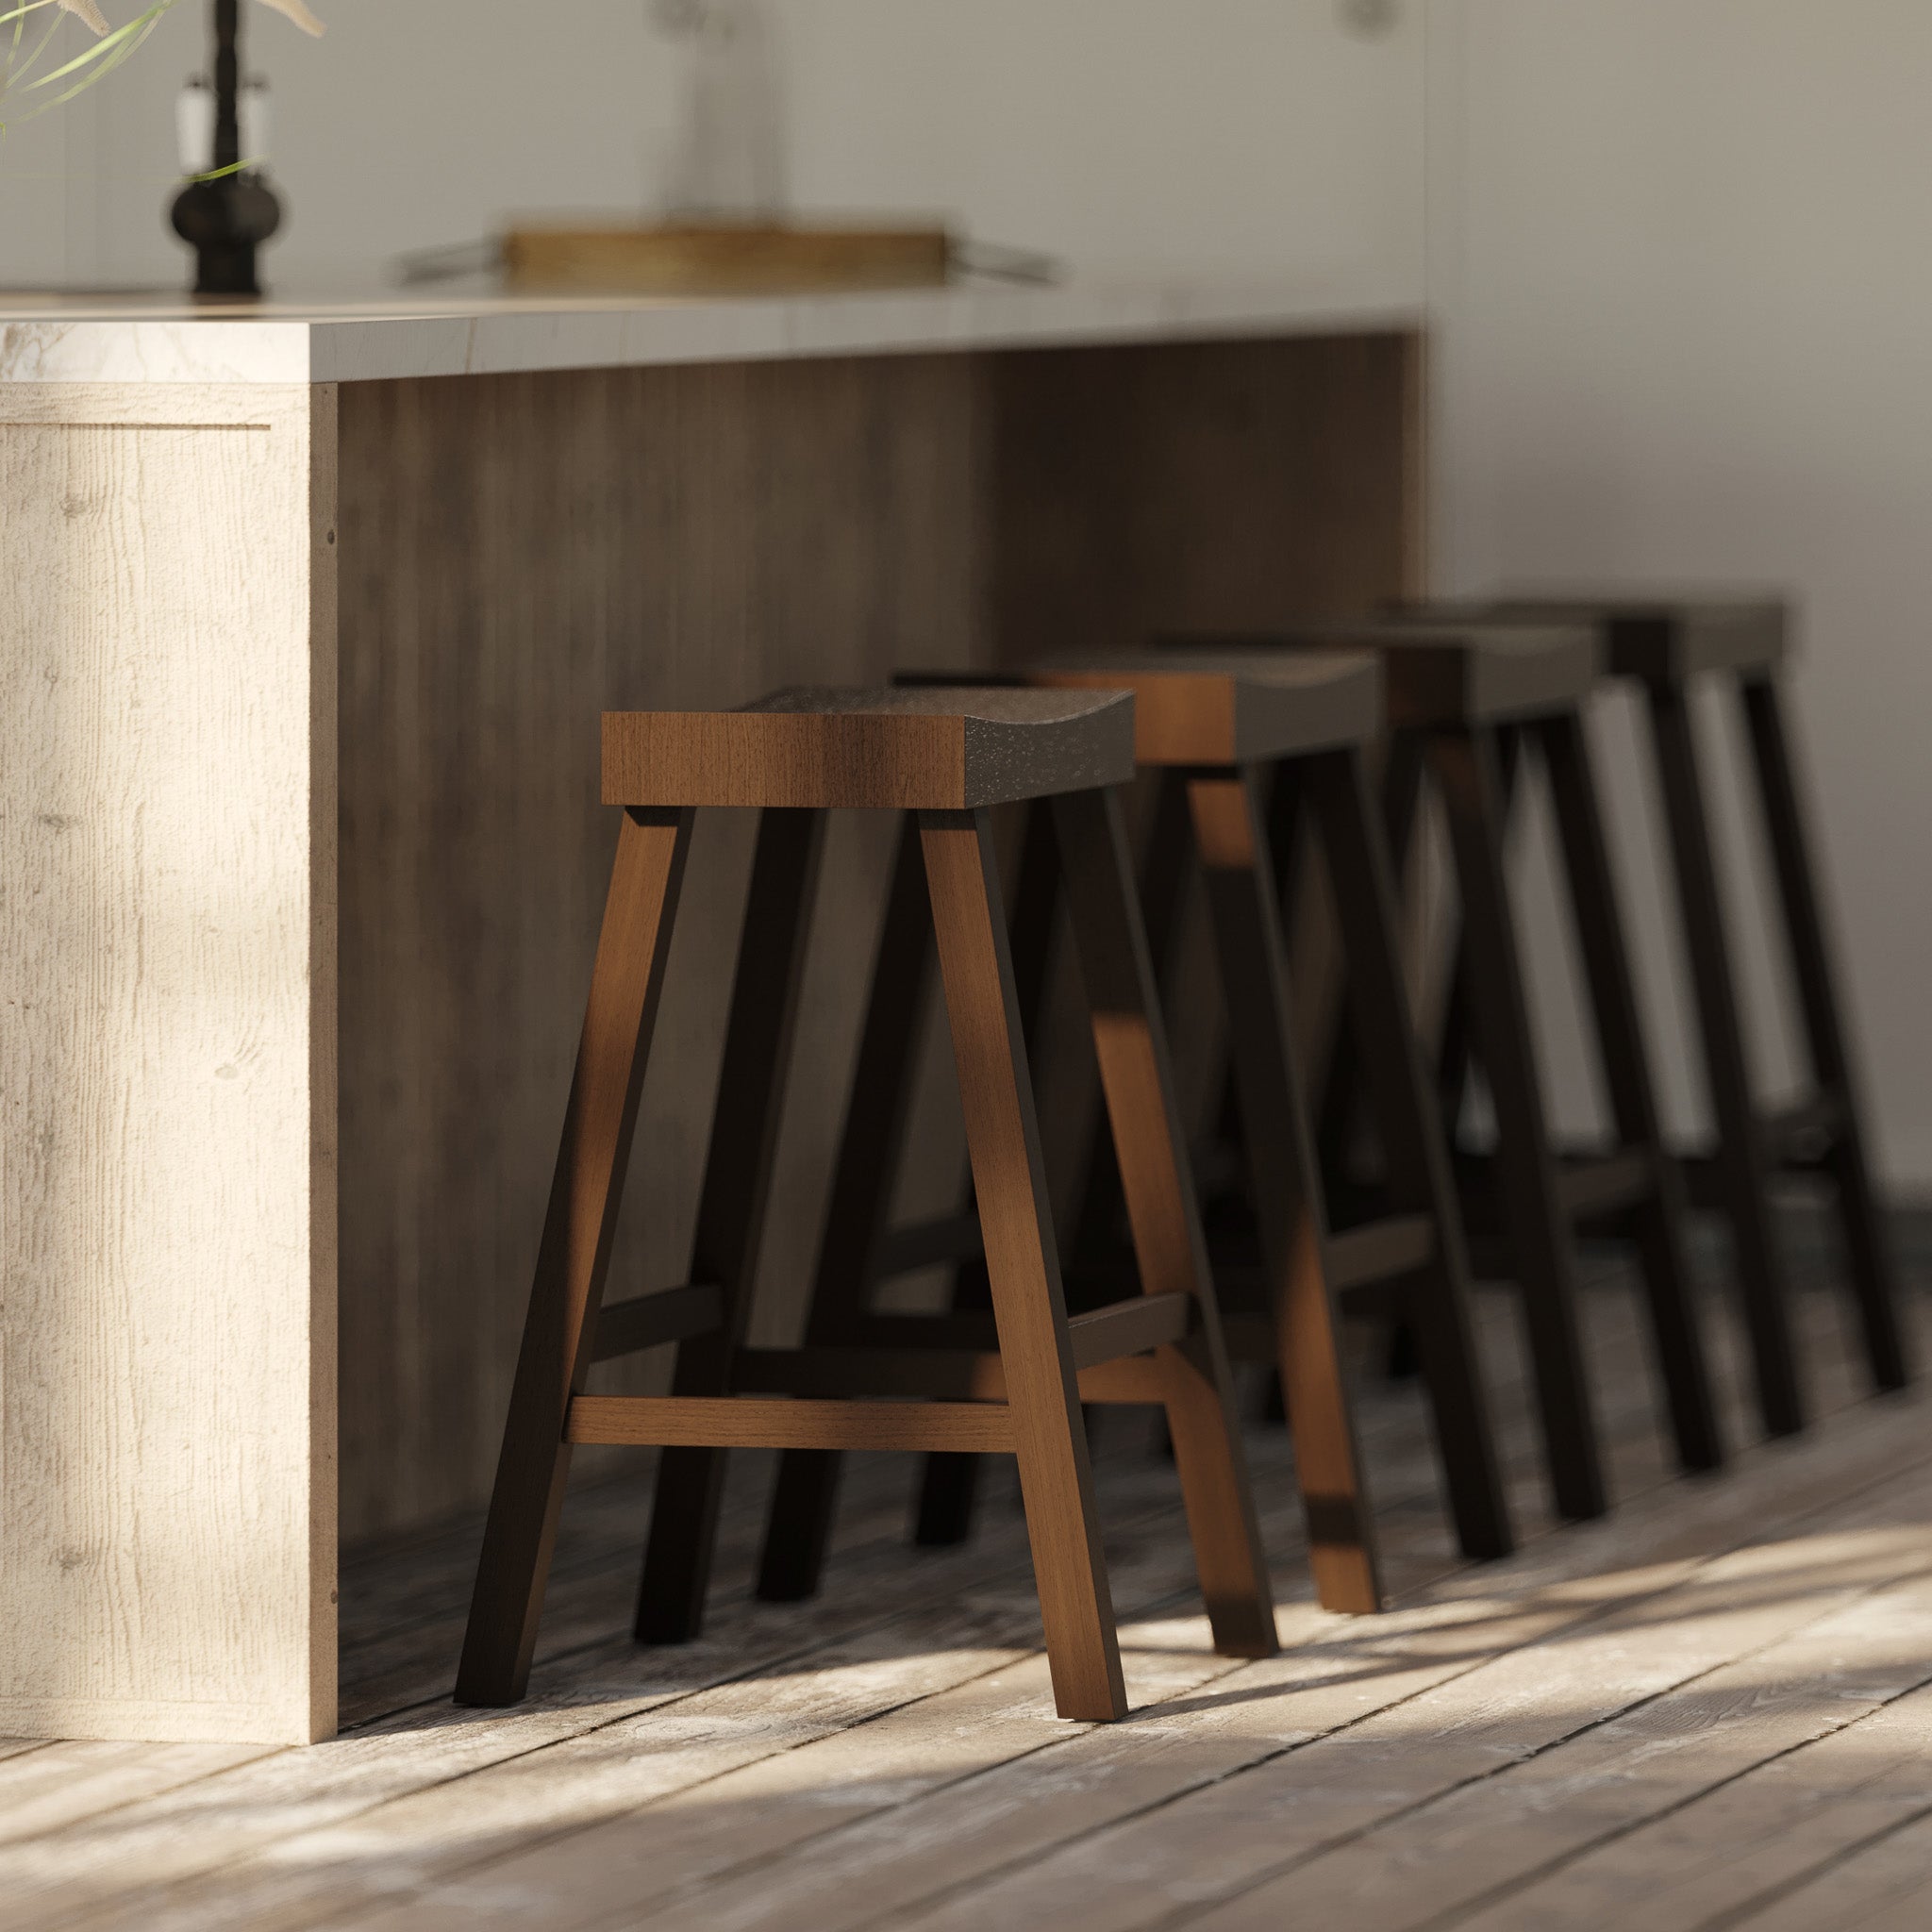 Vincent Counter Stool in Antiqued Brown Finish in Stools by Maven Lane